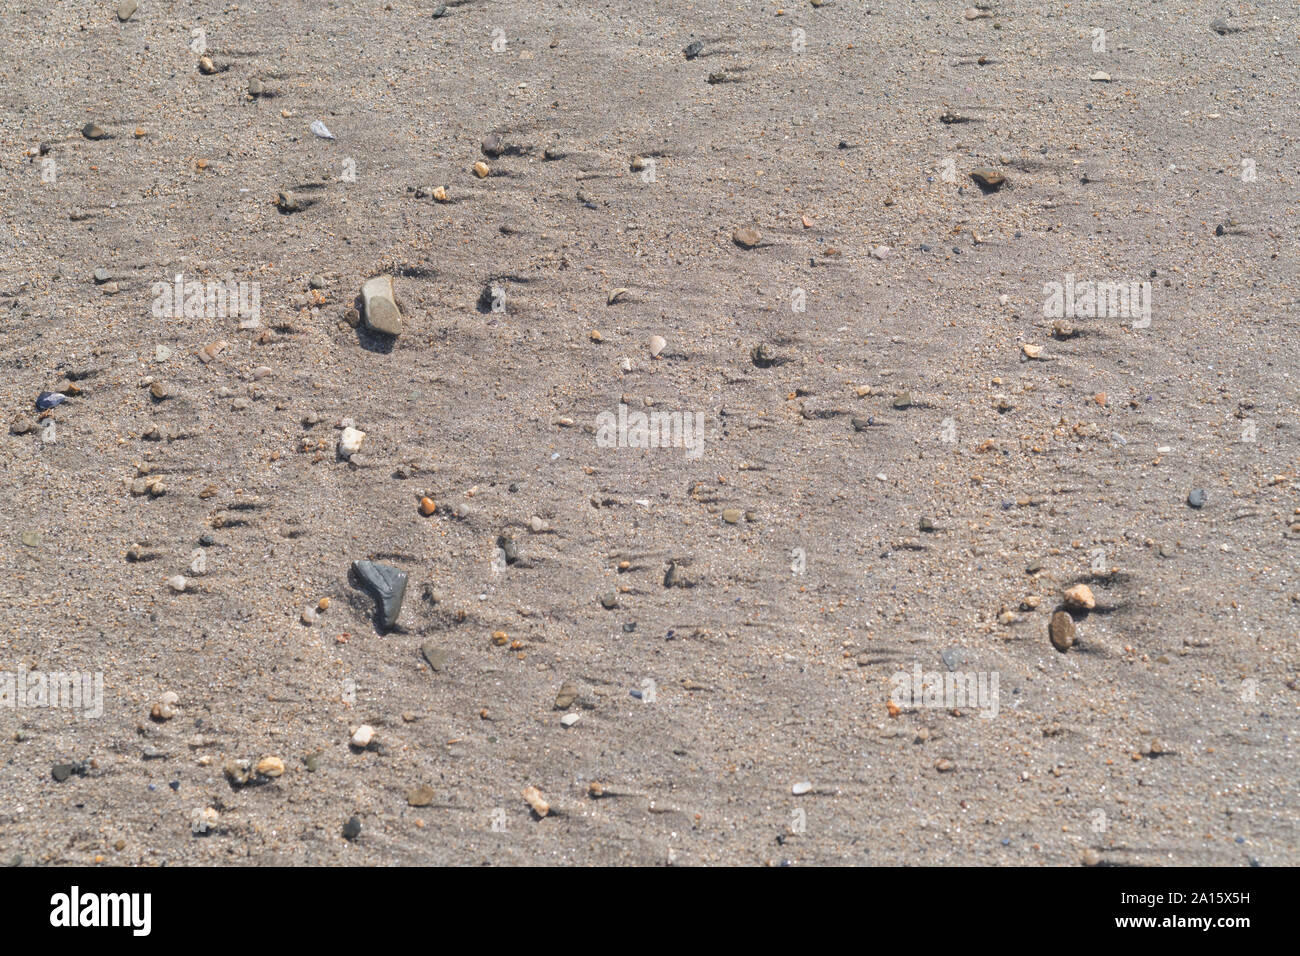 Wet shoreline sand and pebbles left behind as the tide recedes. Stock Photo